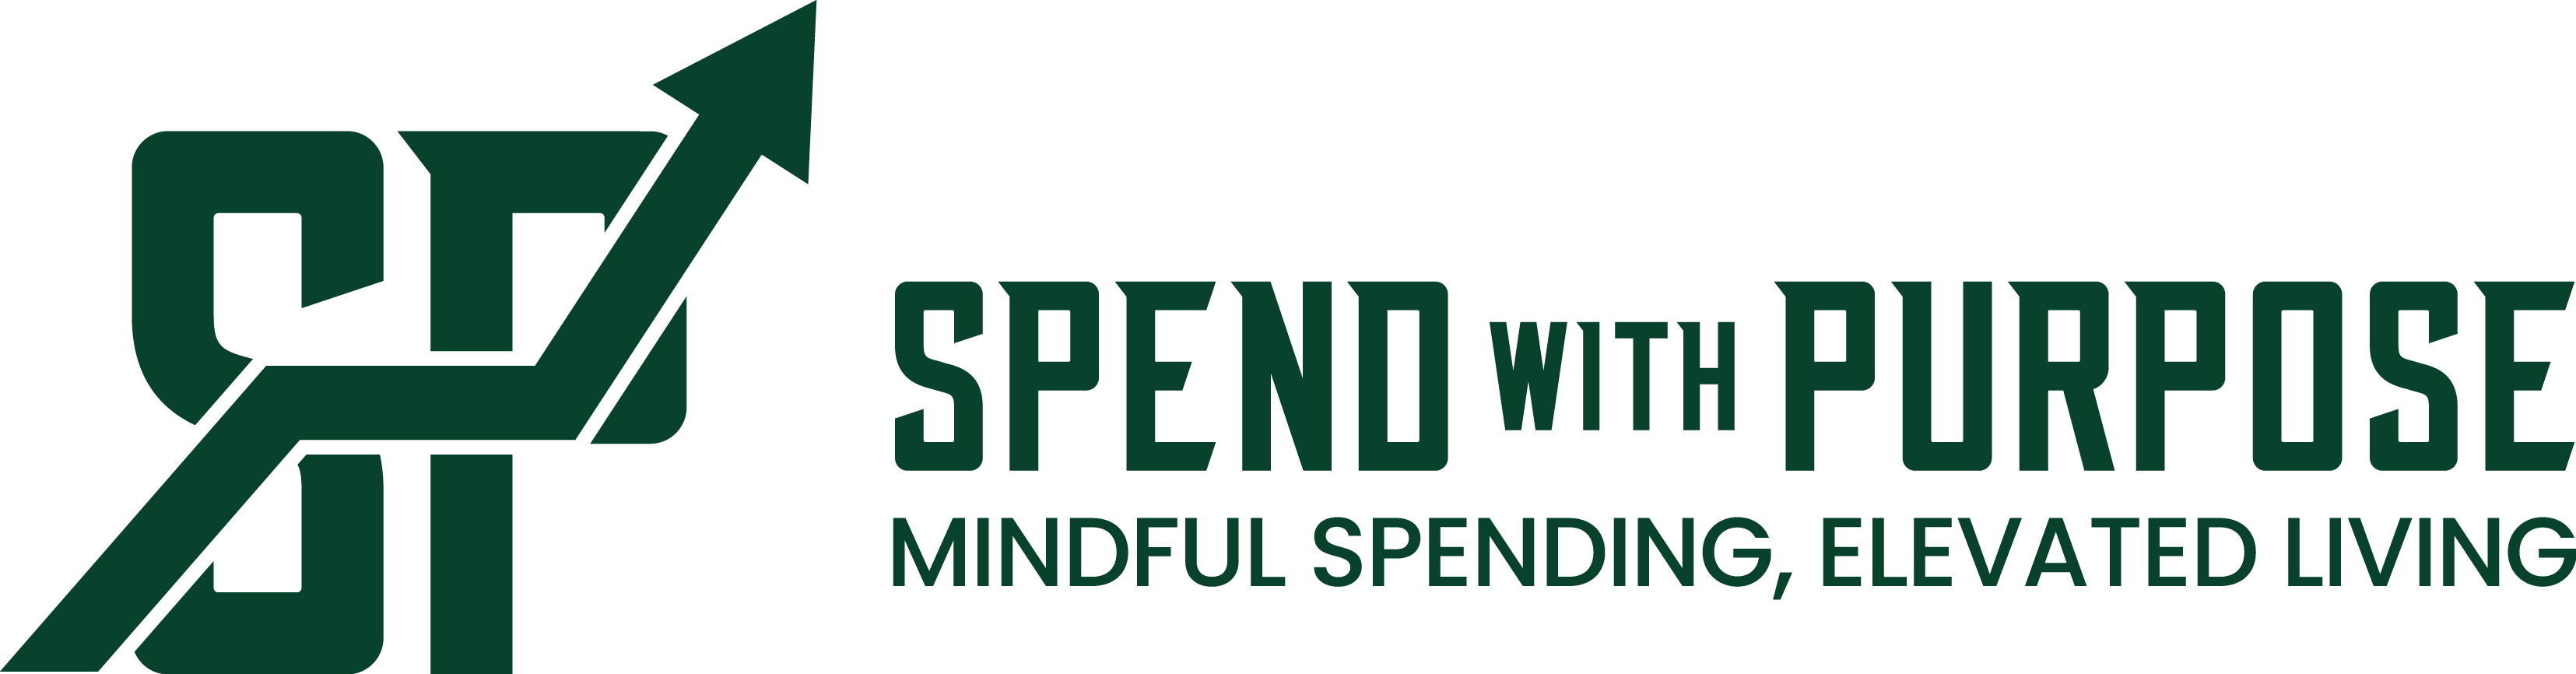 Spend with Purpose